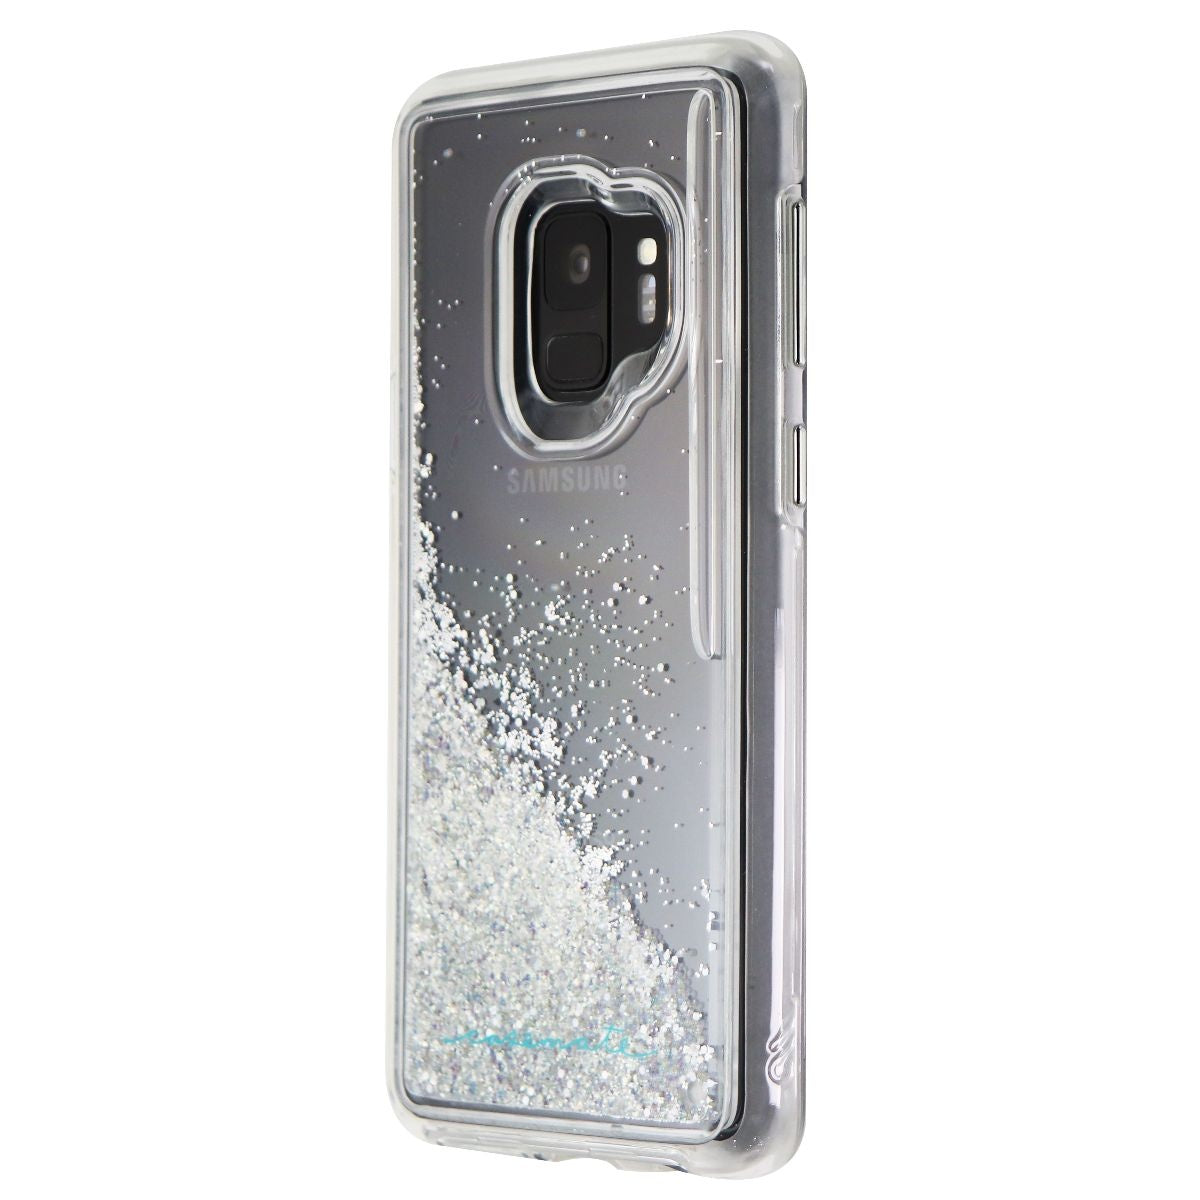 Case-Mate Waterfall Hard Case for Samsung Galaxy S9 - Clear/Silver Glitter Cell Phone - Cases, Covers & Skins Case-Mate    - Simple Cell Bulk Wholesale Pricing - USA Seller